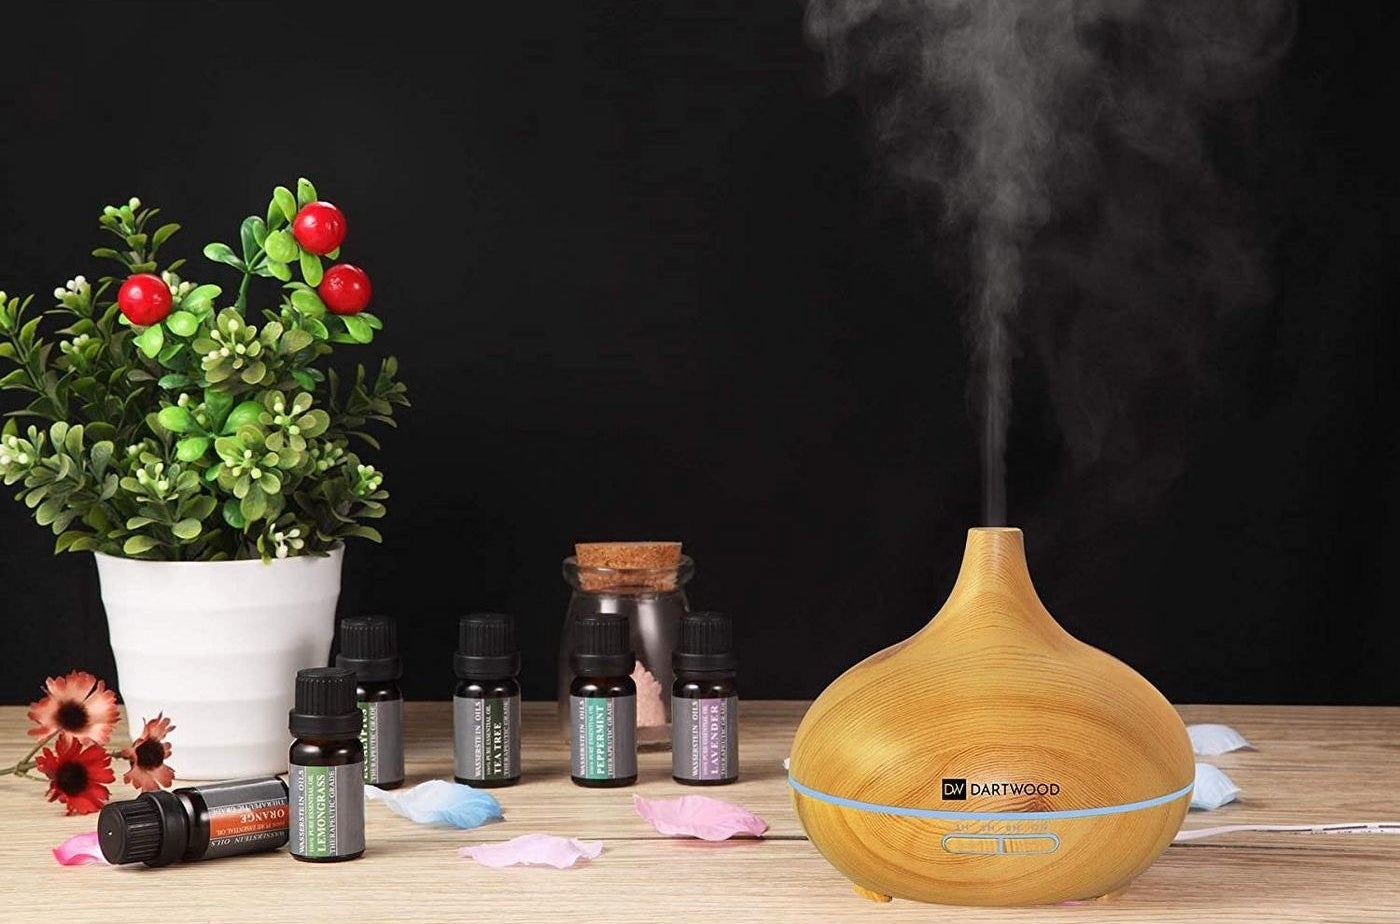 the diffuser next to a plant and oils